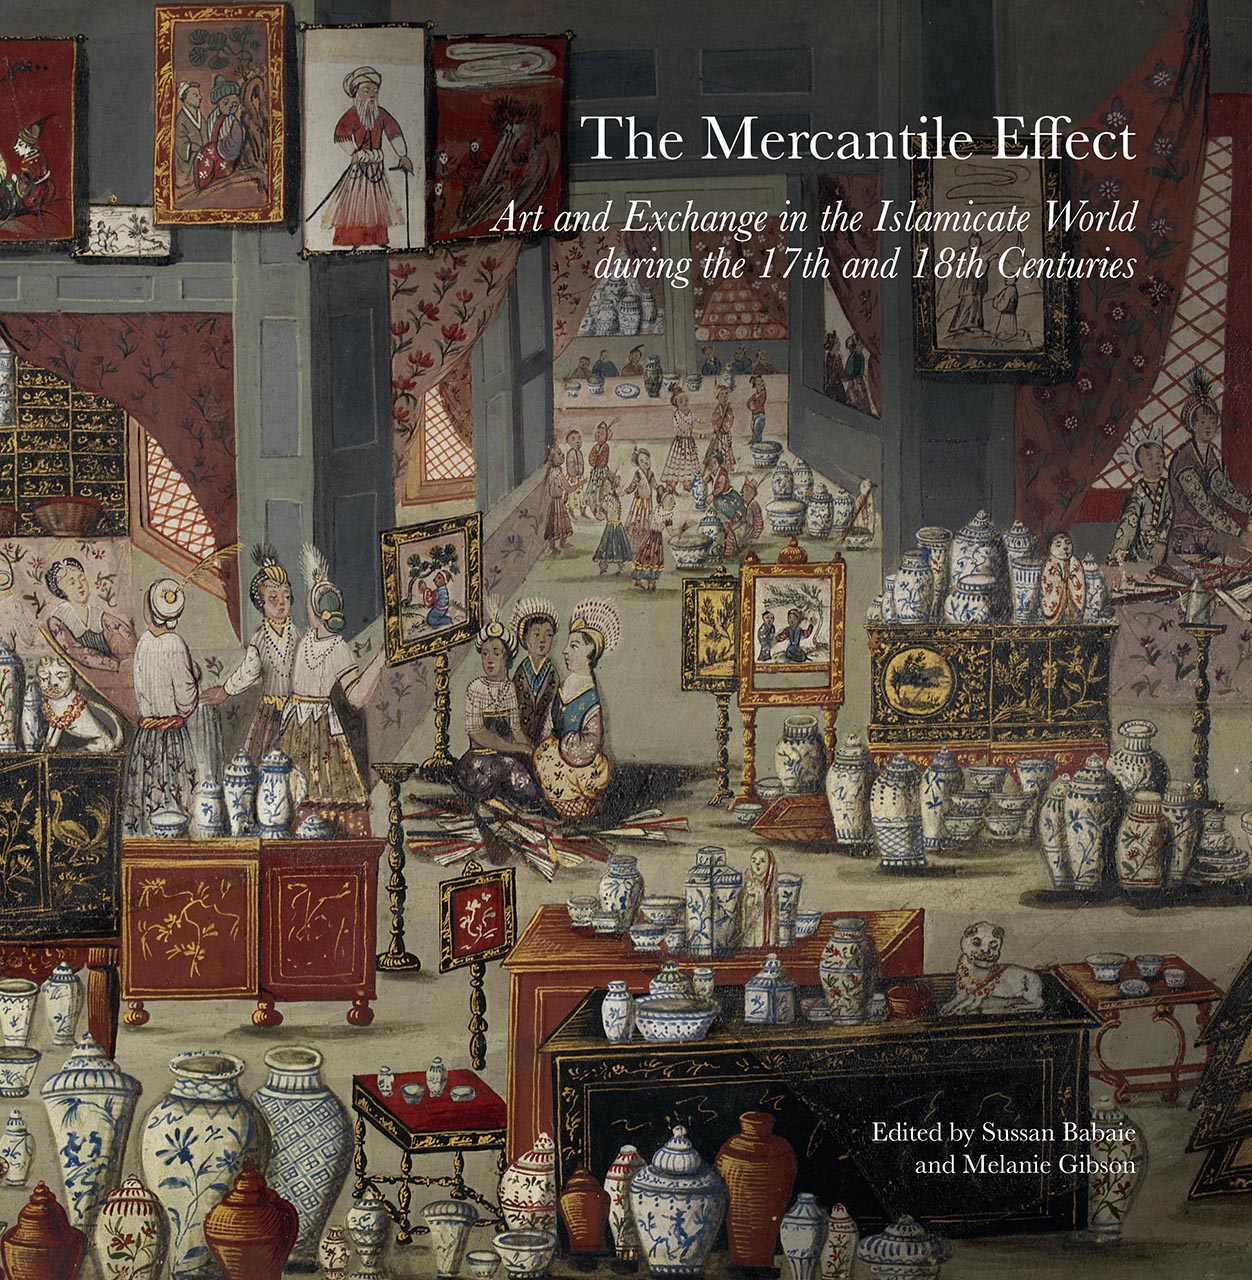 The Mercantile Effect: Art and Exchange in the Islamicate World 